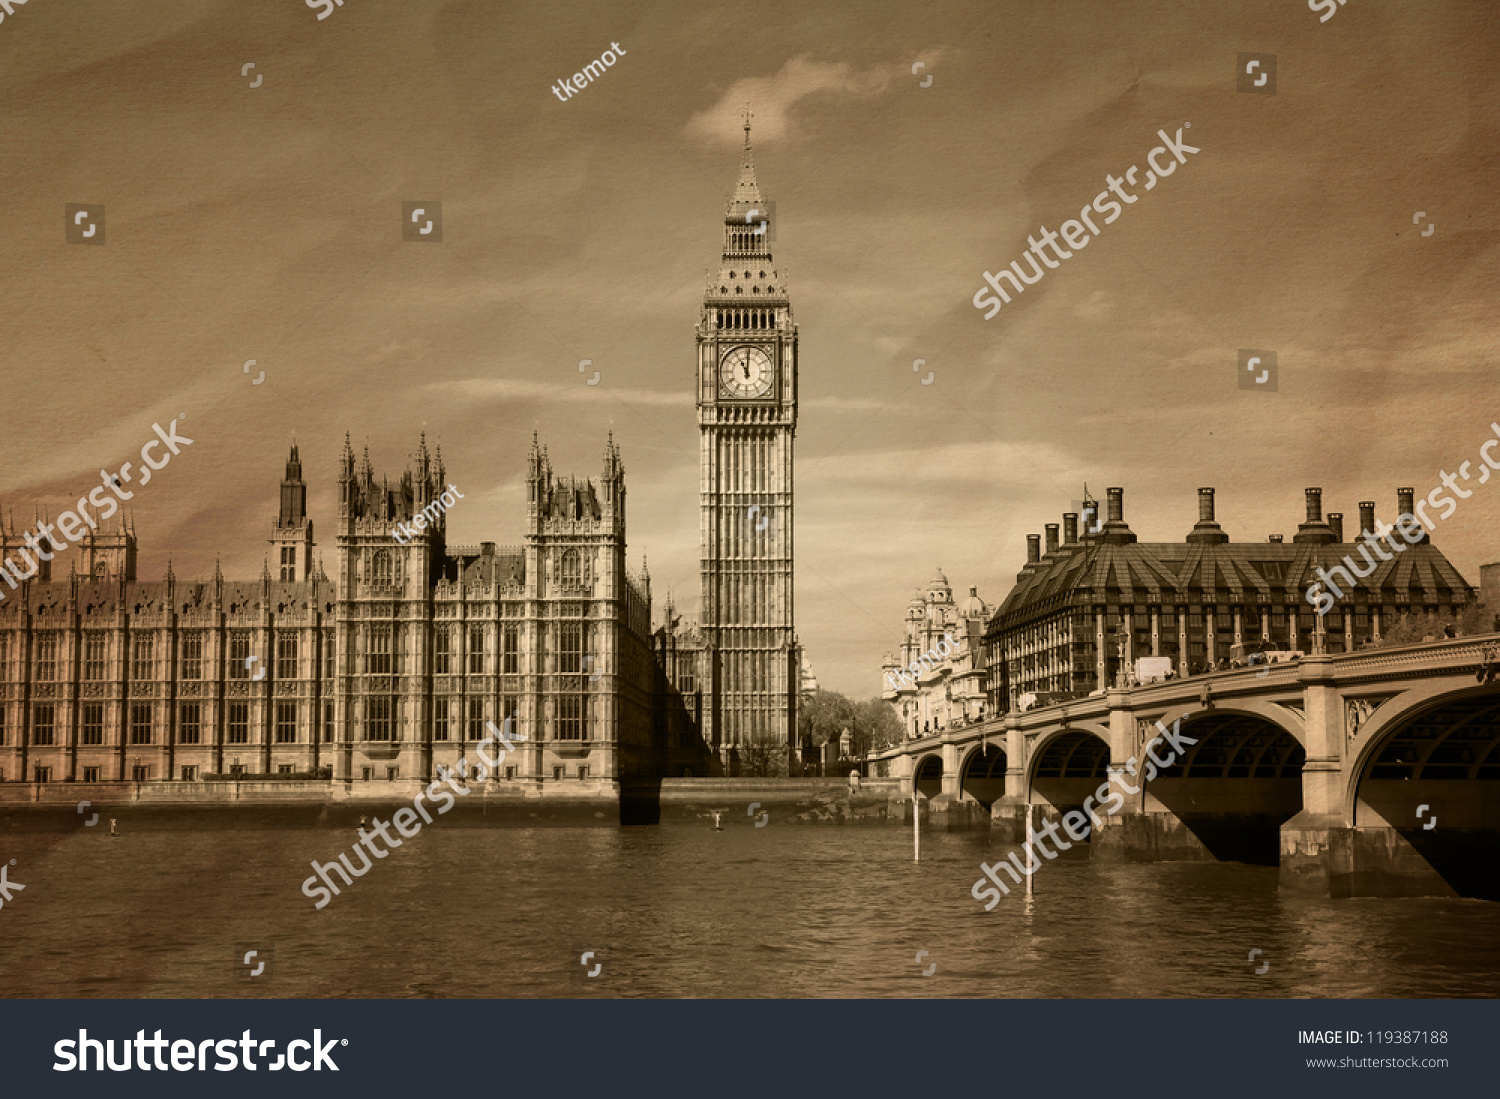 Vintage view of London,  Big Ben & Houses of Parliament #119387188